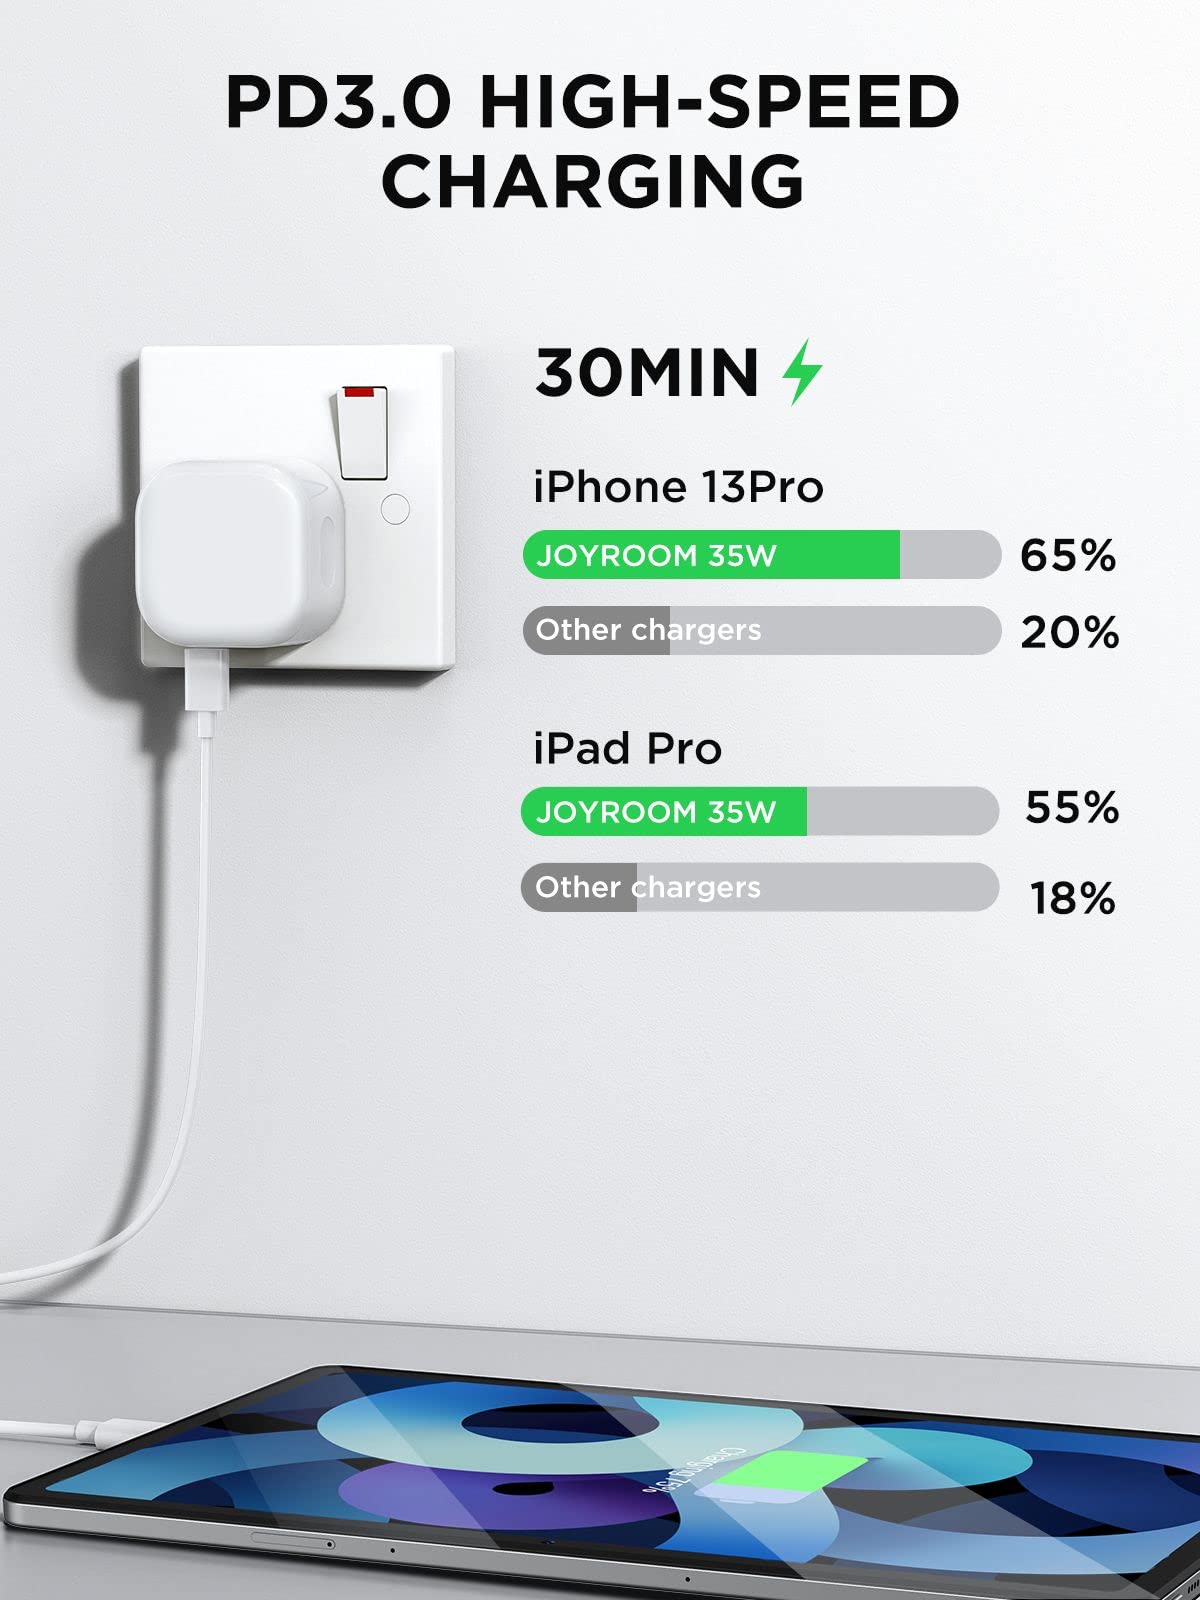 JOYROOM 35W USB C Fast Charger Plug, Dual USB‑C Port Power Adapter PD3.0 Wall Charger Compatible with iPhone 13/13 Pro/13 Pro Max/12/11/SE 3, iPad Pro, AirPods Pro, MacBook Air, Apple Watch etc